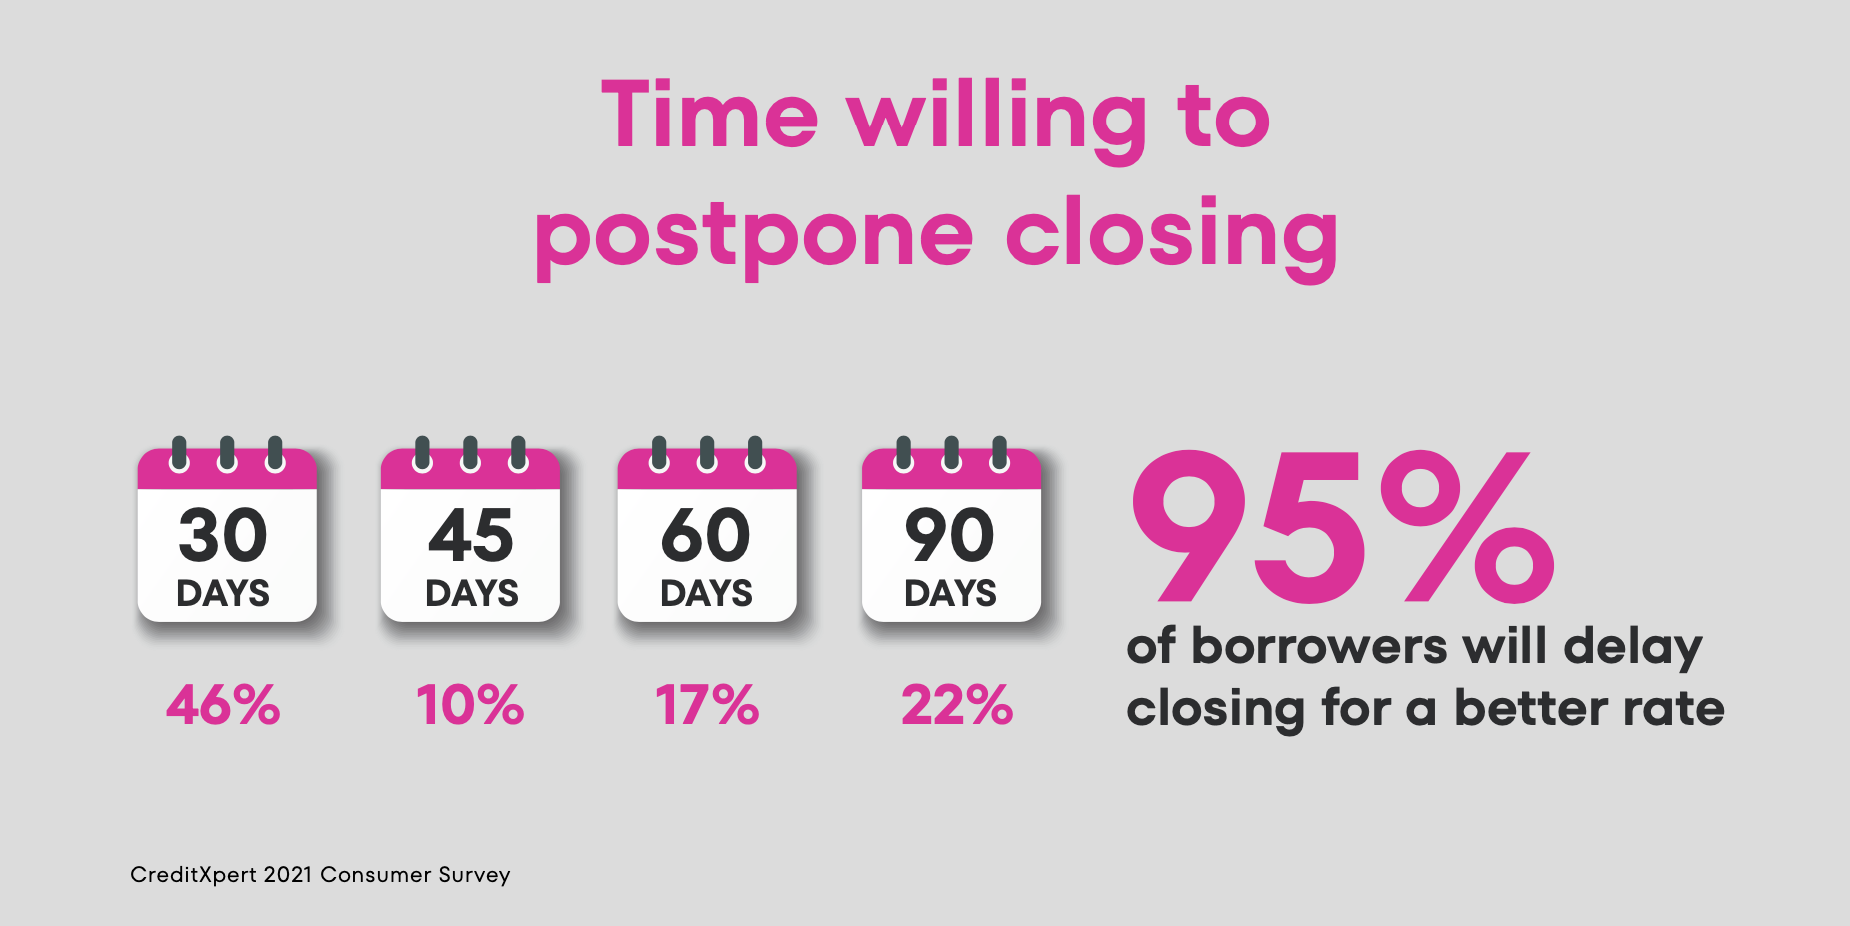 How long would you be willing to postpone closing to improve your score (ReFi)?